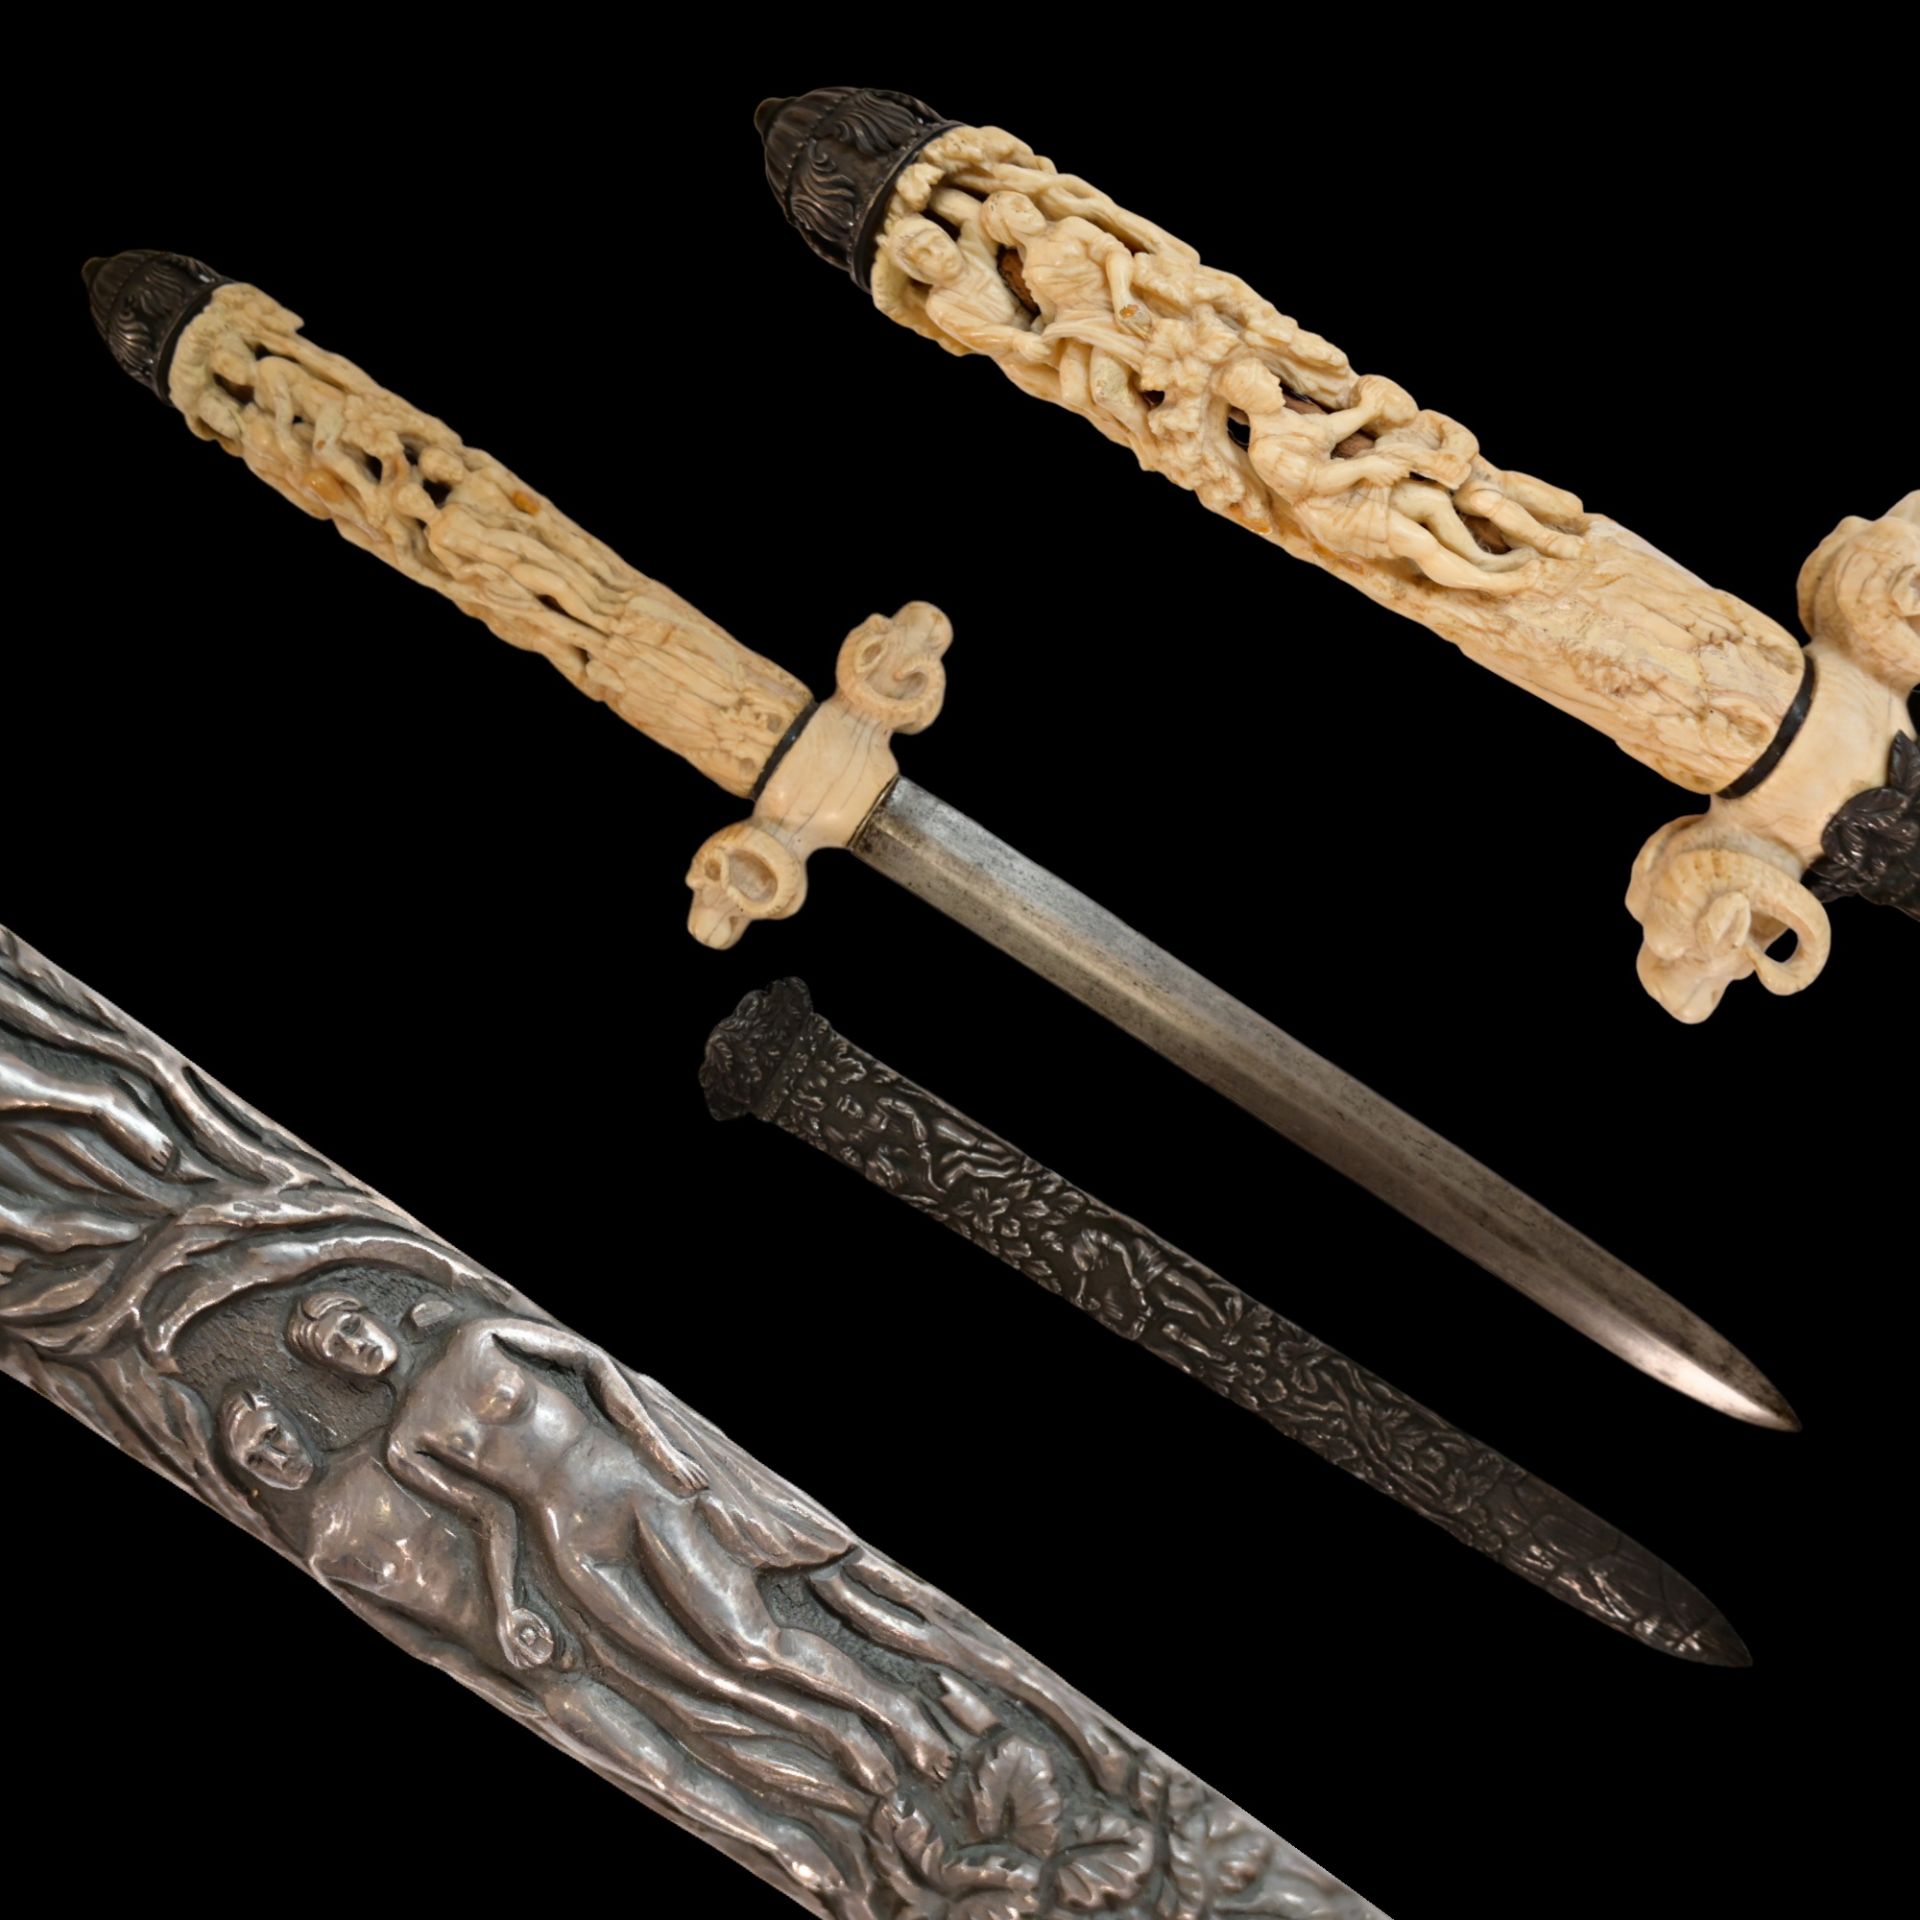 A fine French dagger with carved bone hilt and silver scabbard with erotic scenes, 19th century.